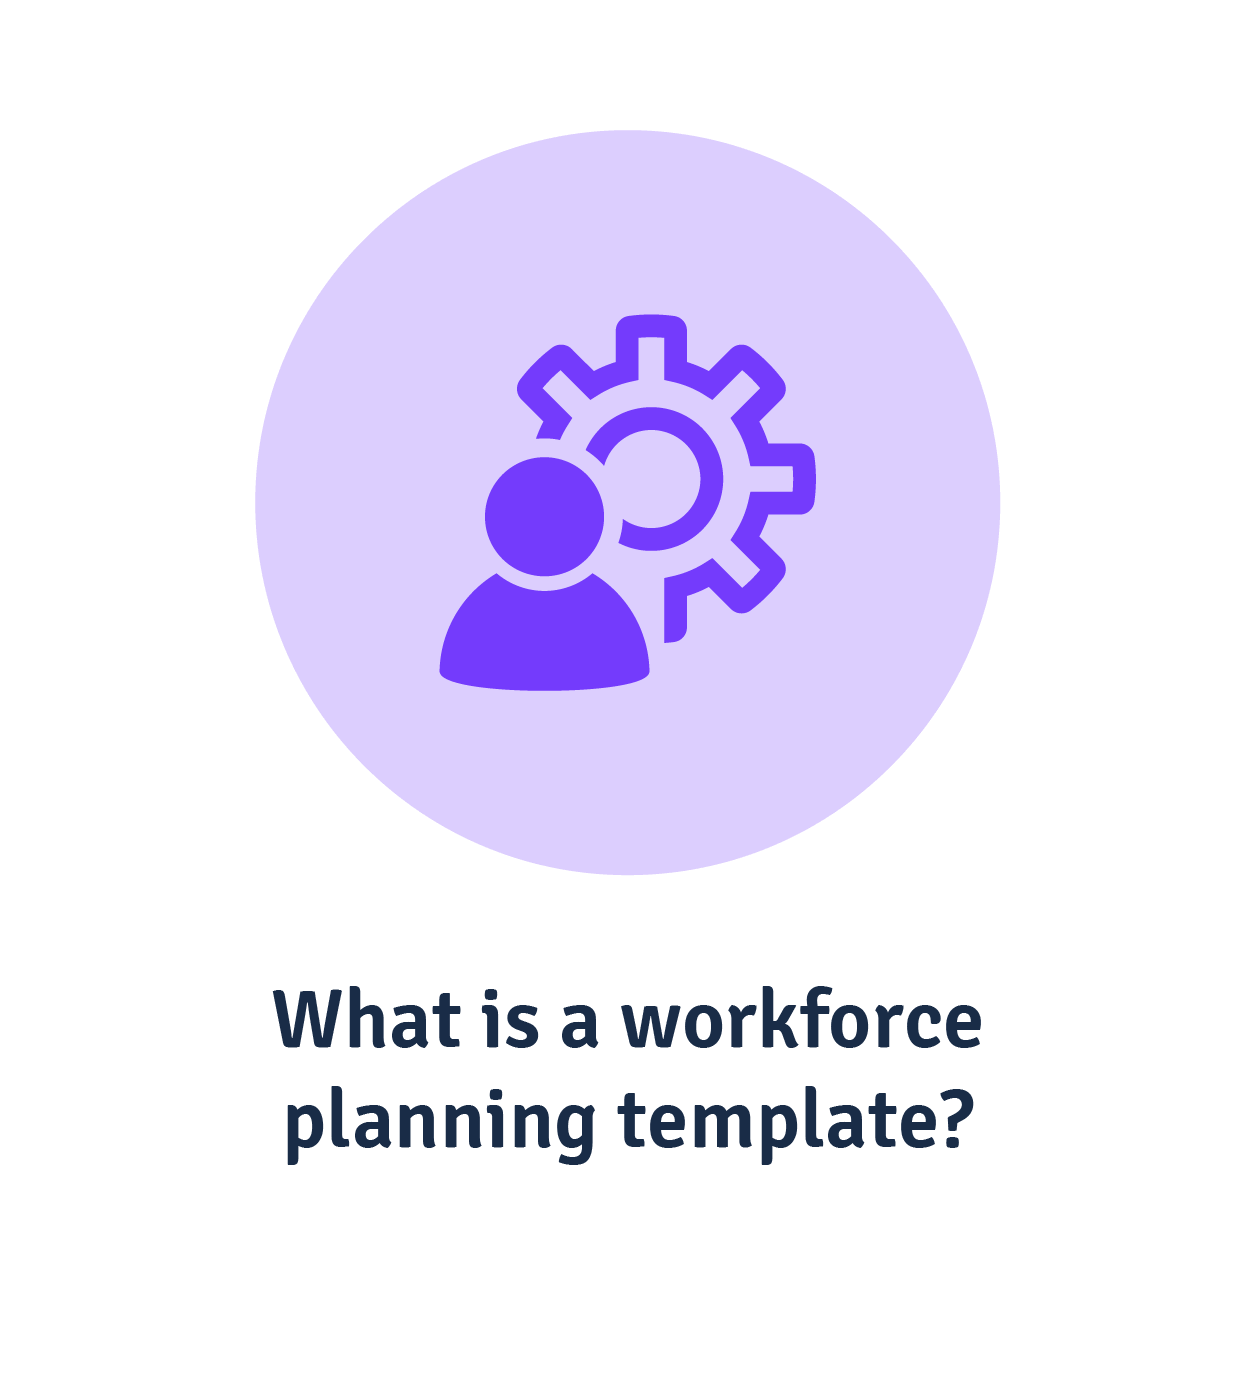 What is a workforce planning template